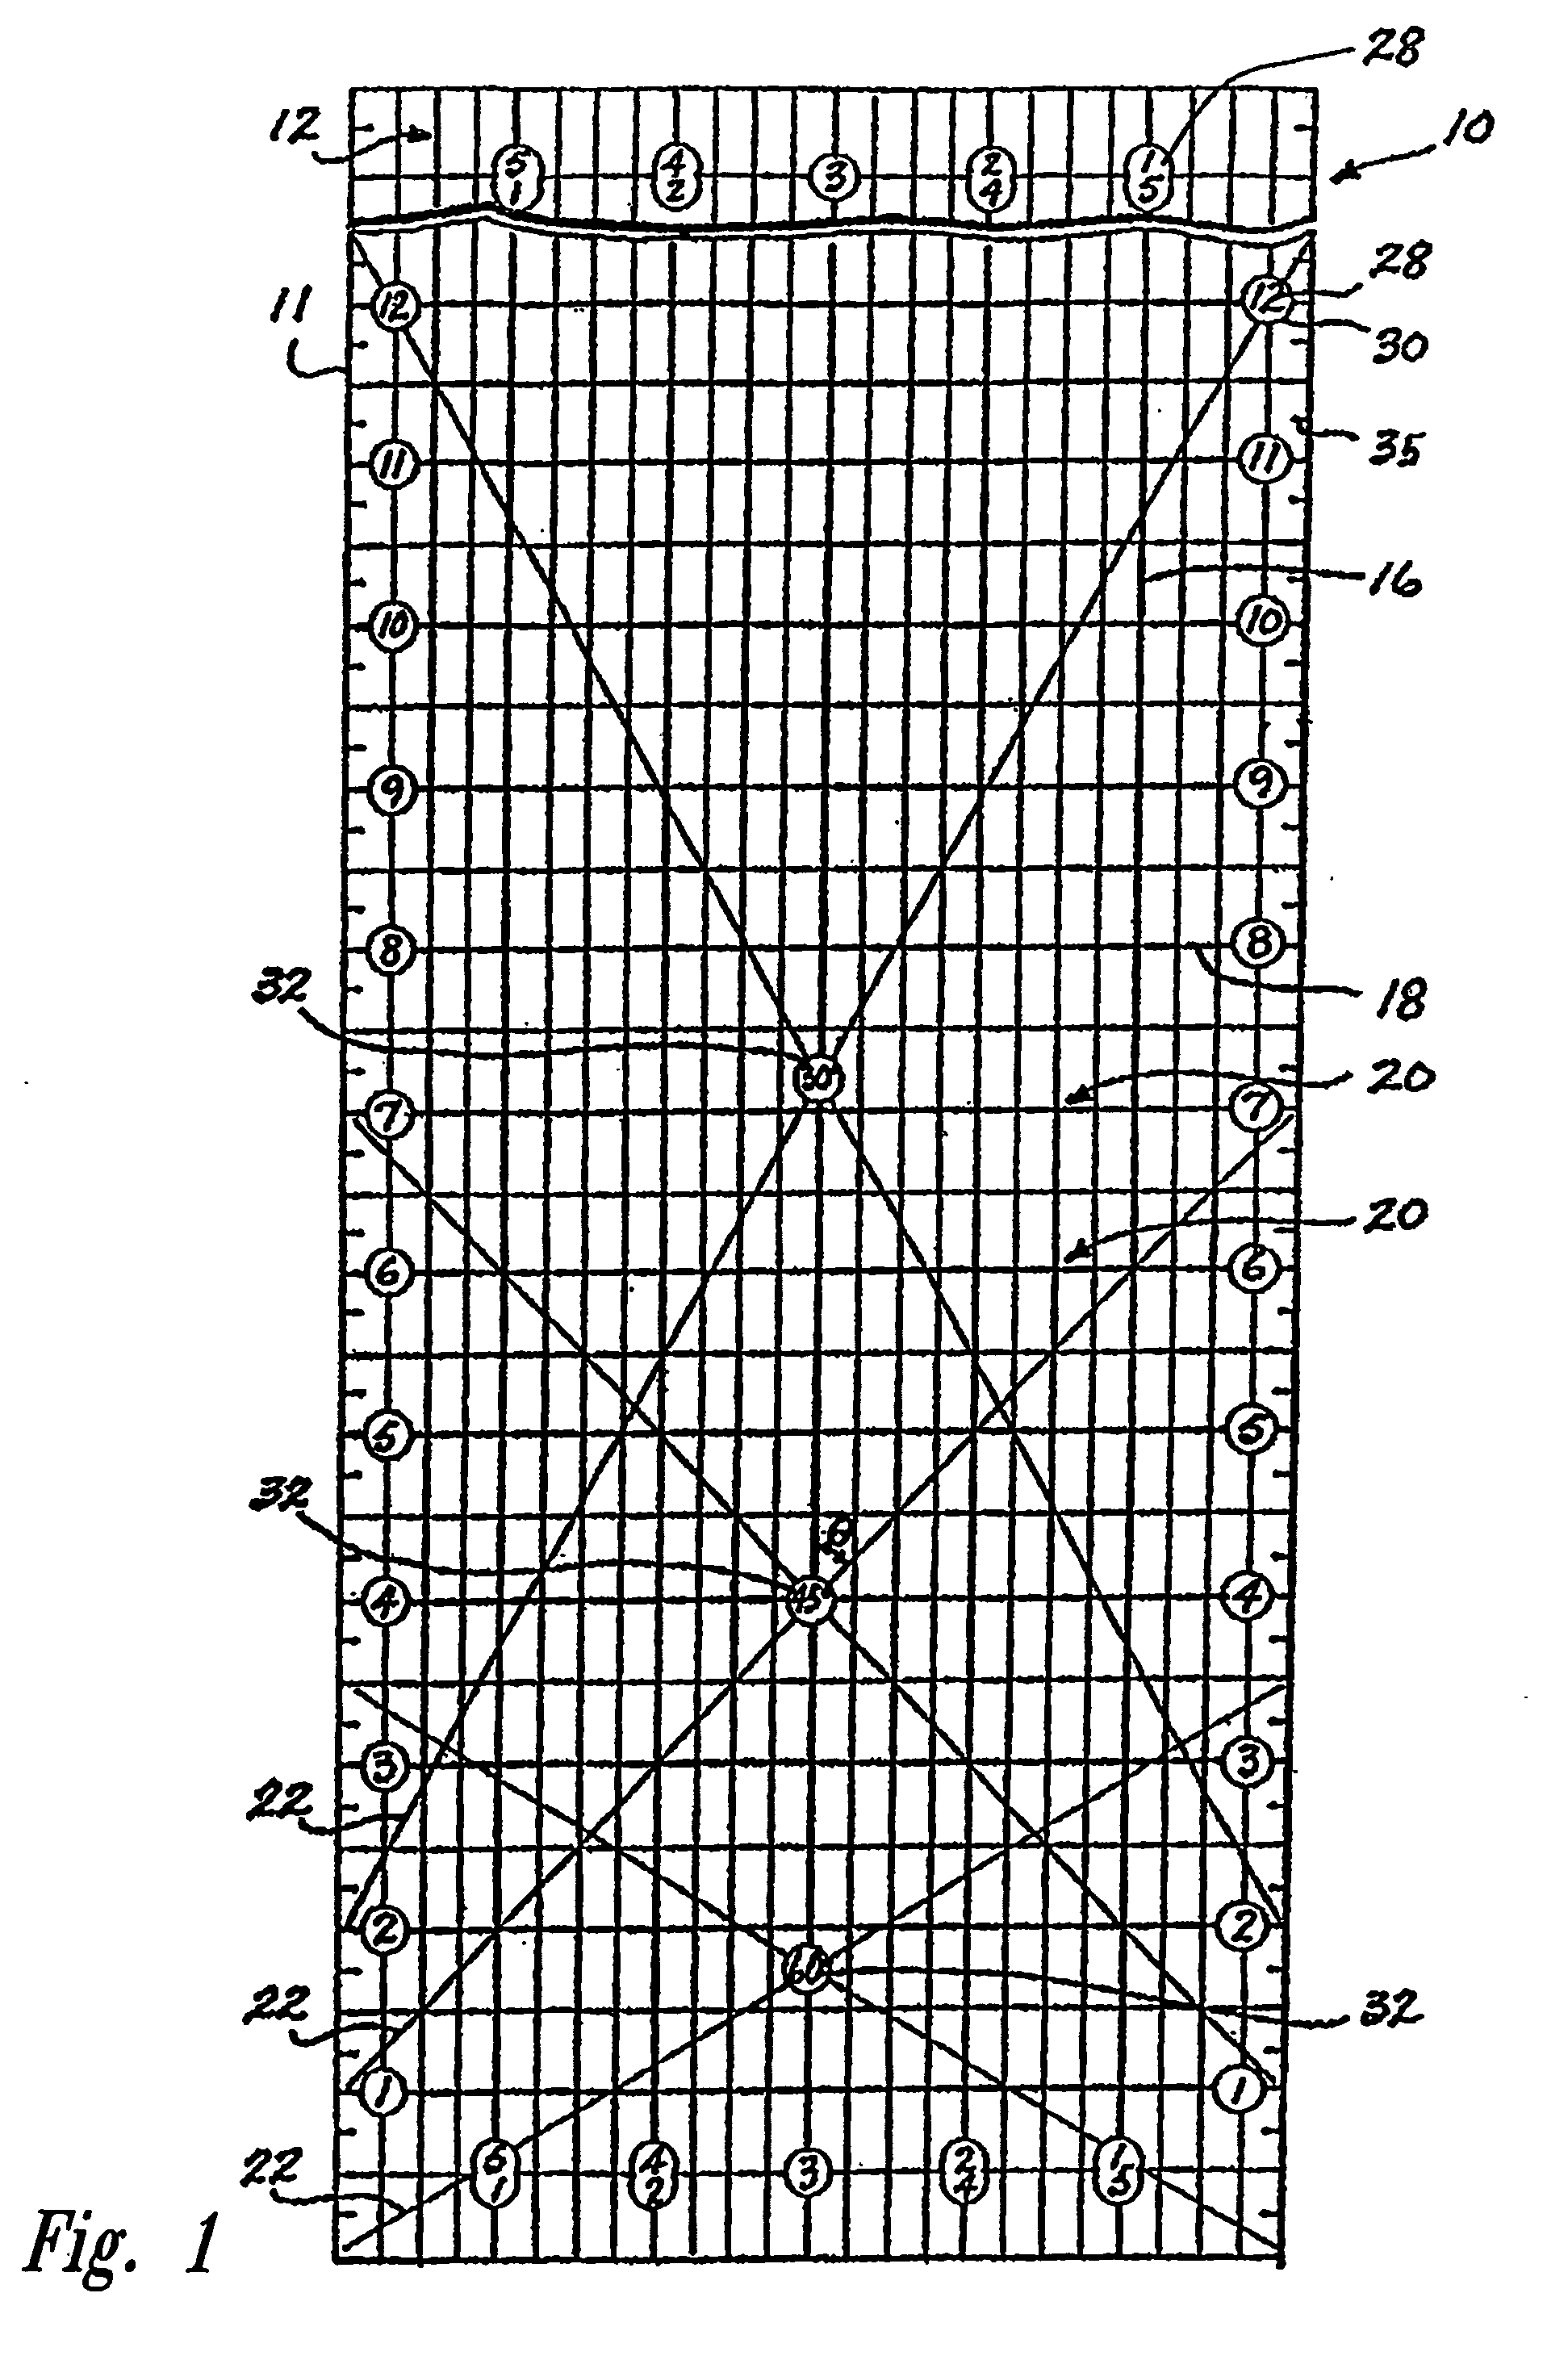 Non-slip measuring tool and method of making